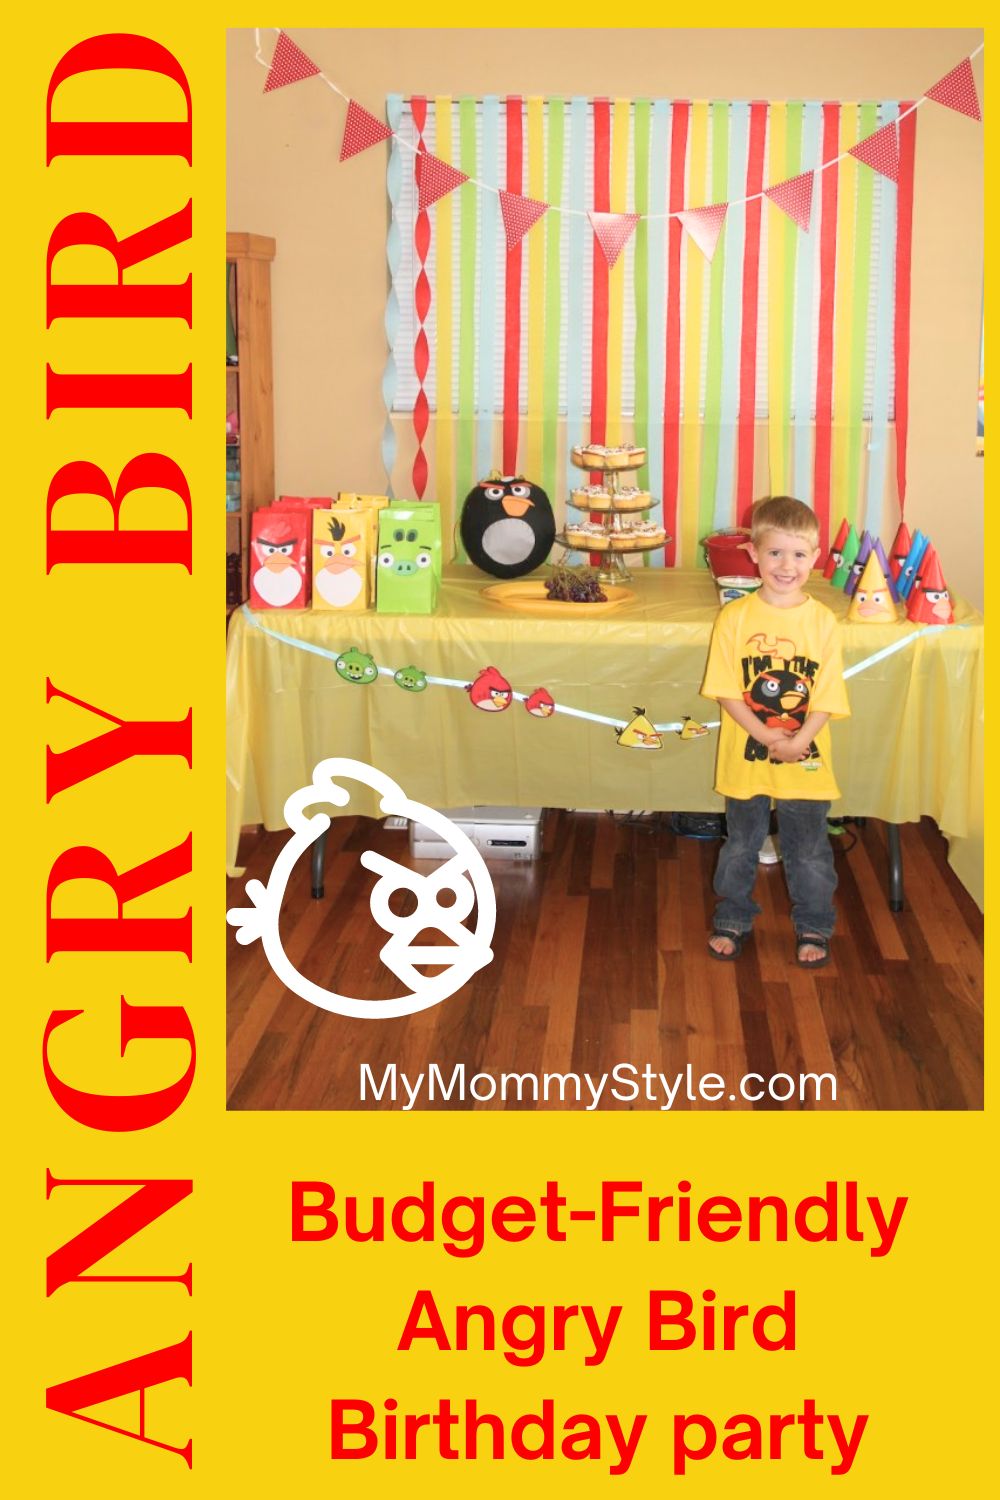 Planning an Angry Bird birthday party? Find budget-friendly decor ideas, DIY crafts, and fun activities to make your celebration a hit! Get inspired and start pinning. #angrybirds #birthdaypartyideas via @mymommystyle